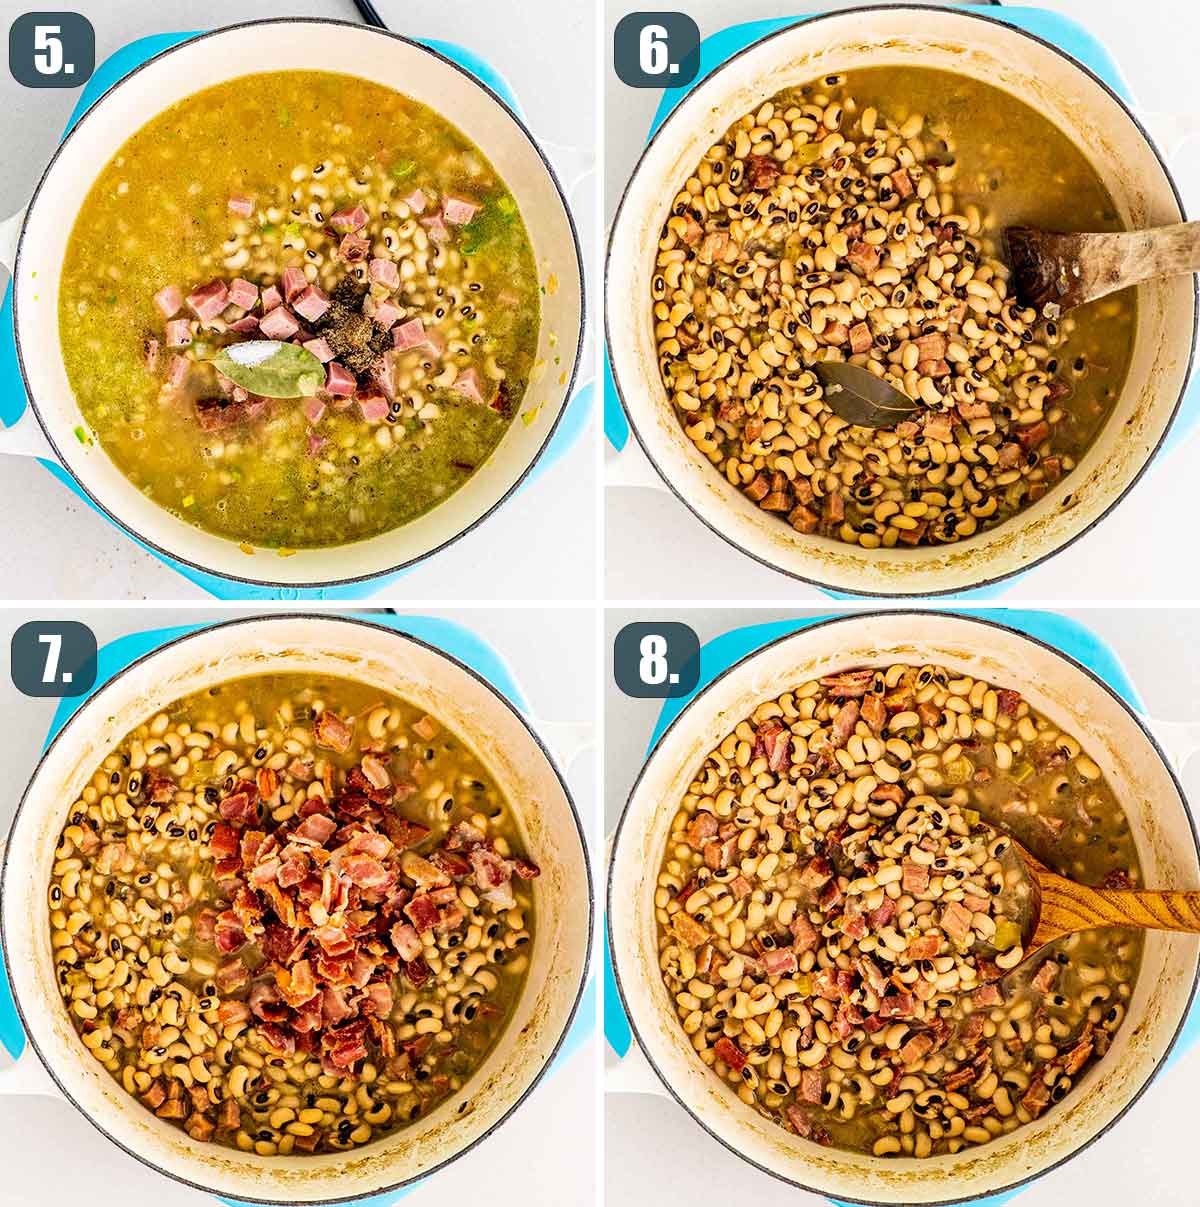 process shots showing how to cook black eyed peas.